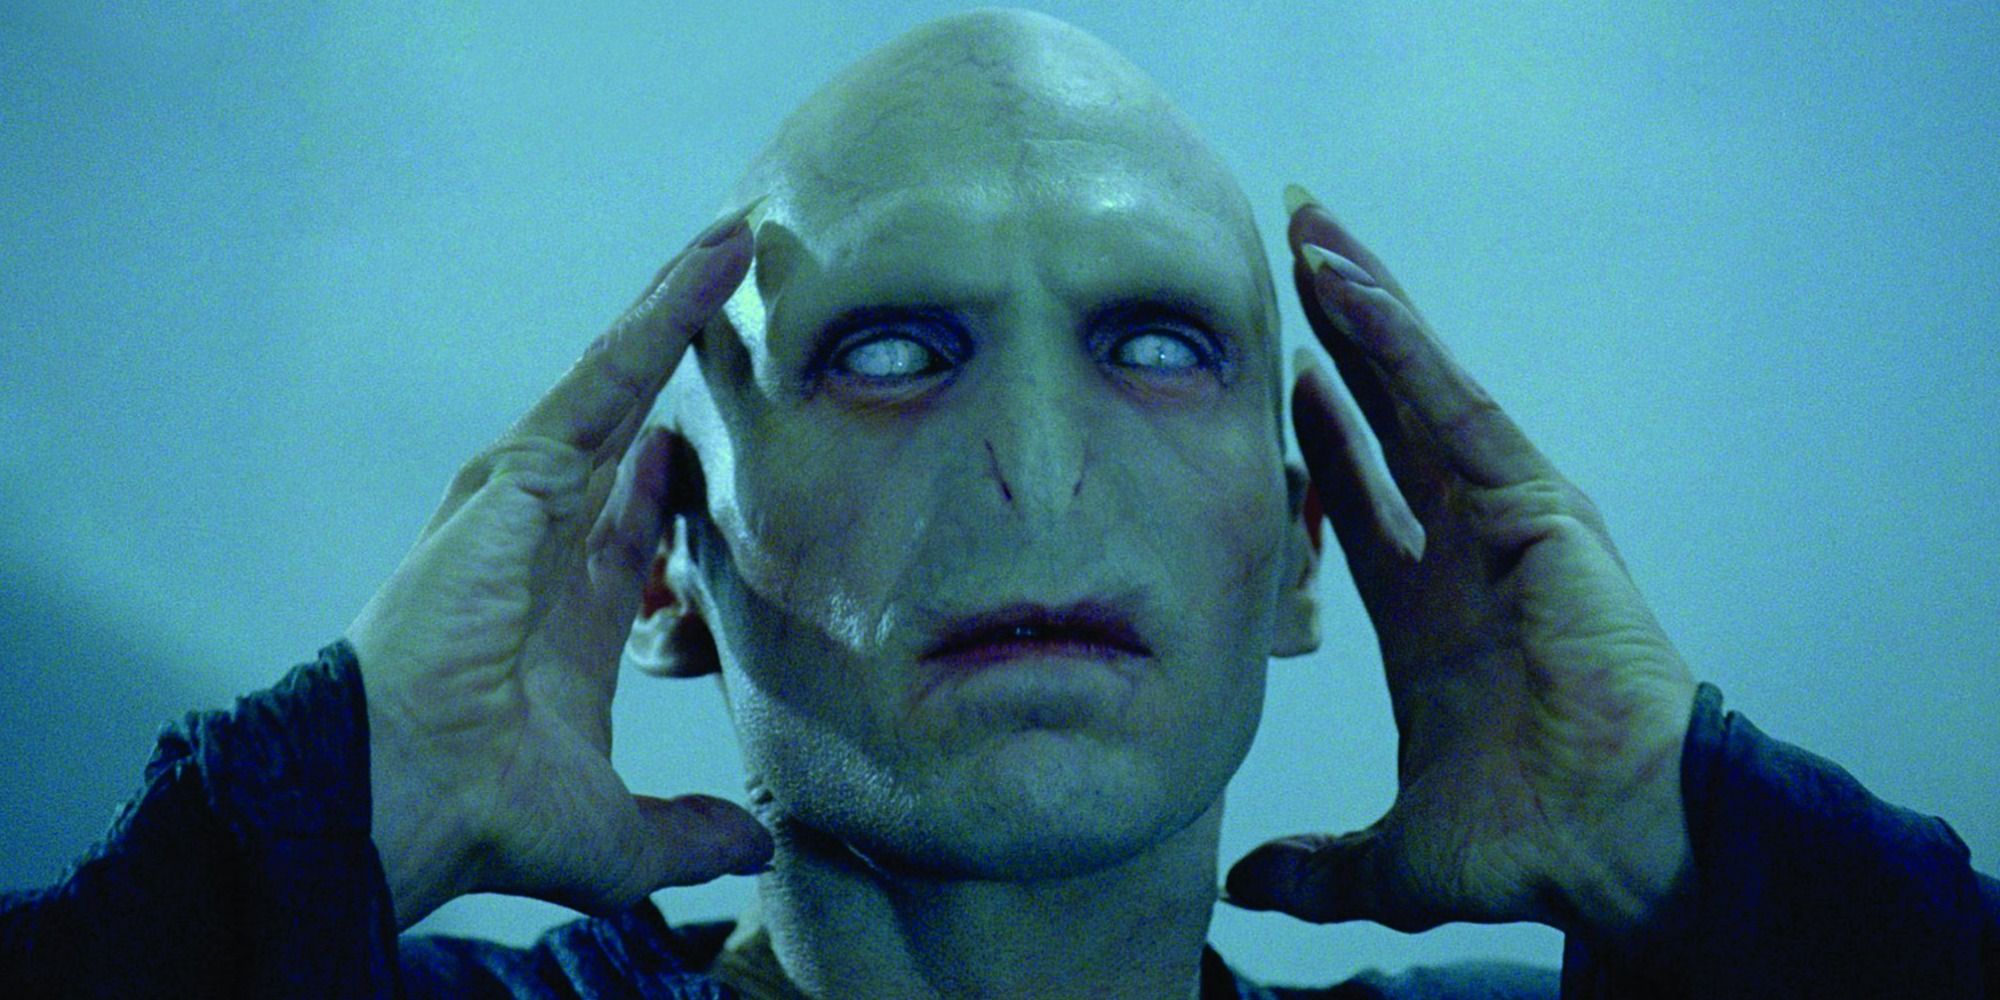 Voldemort with white eyes, holds his hands up to the sides of his head